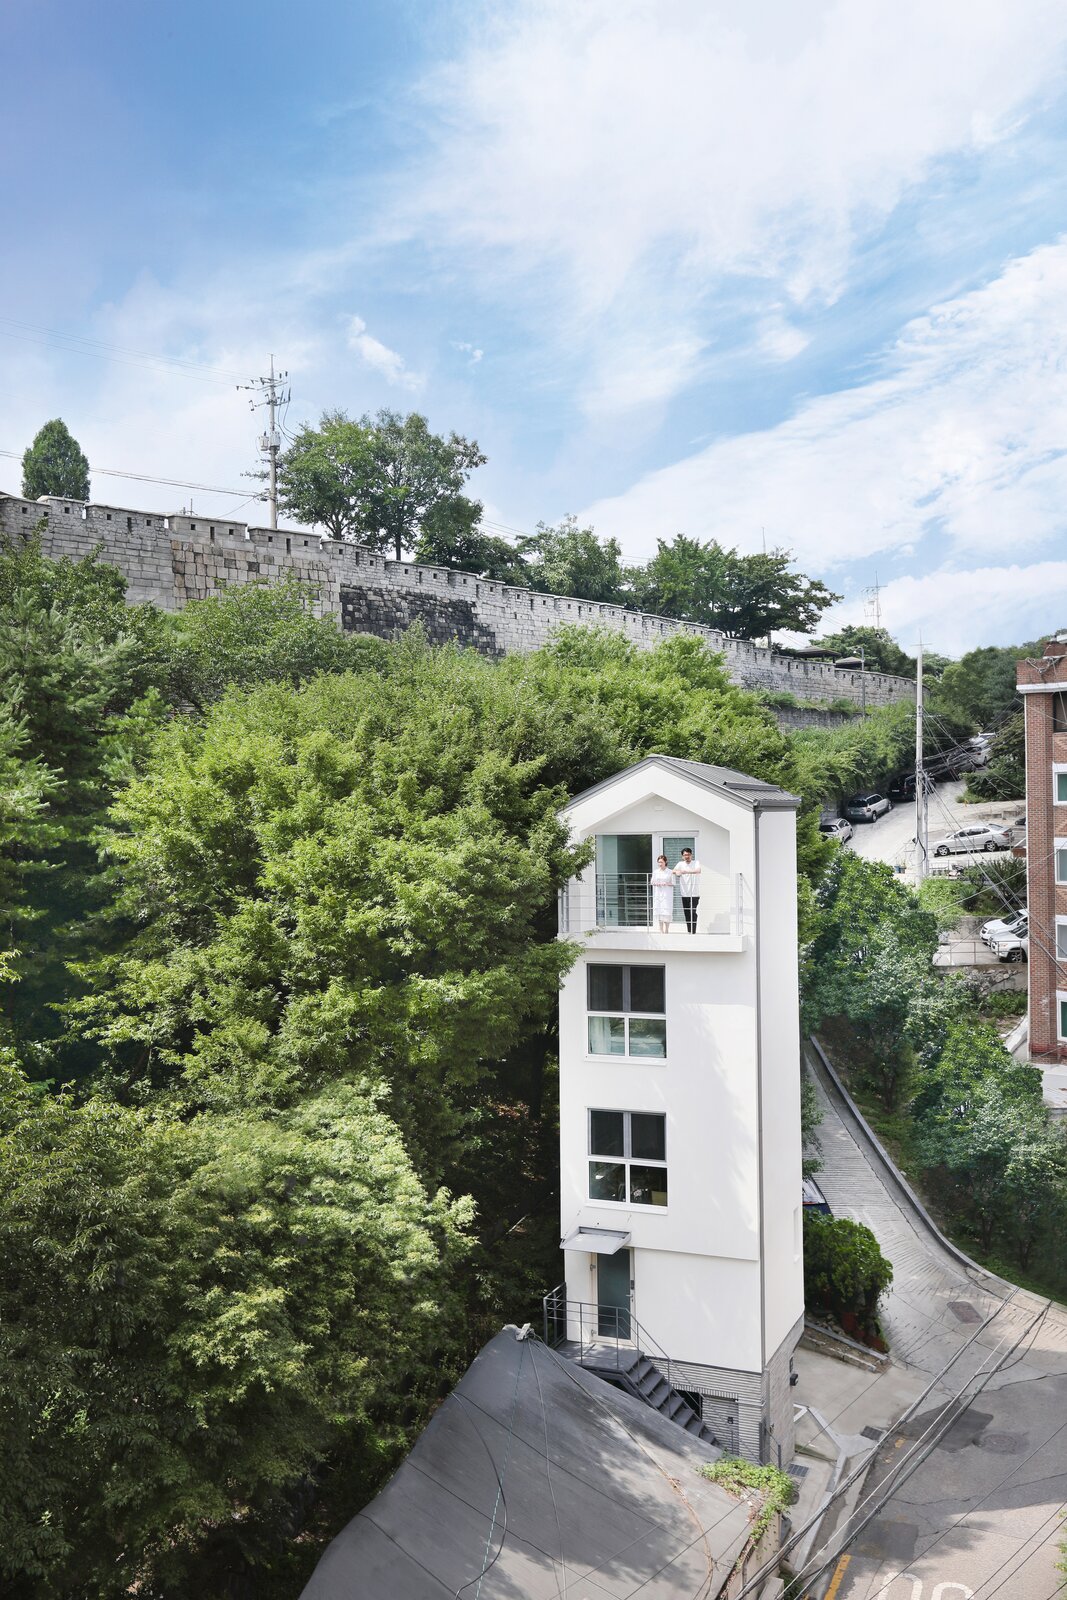 An Architect’s Slim Home Squeezes Into a Tiny Lot in Seoul